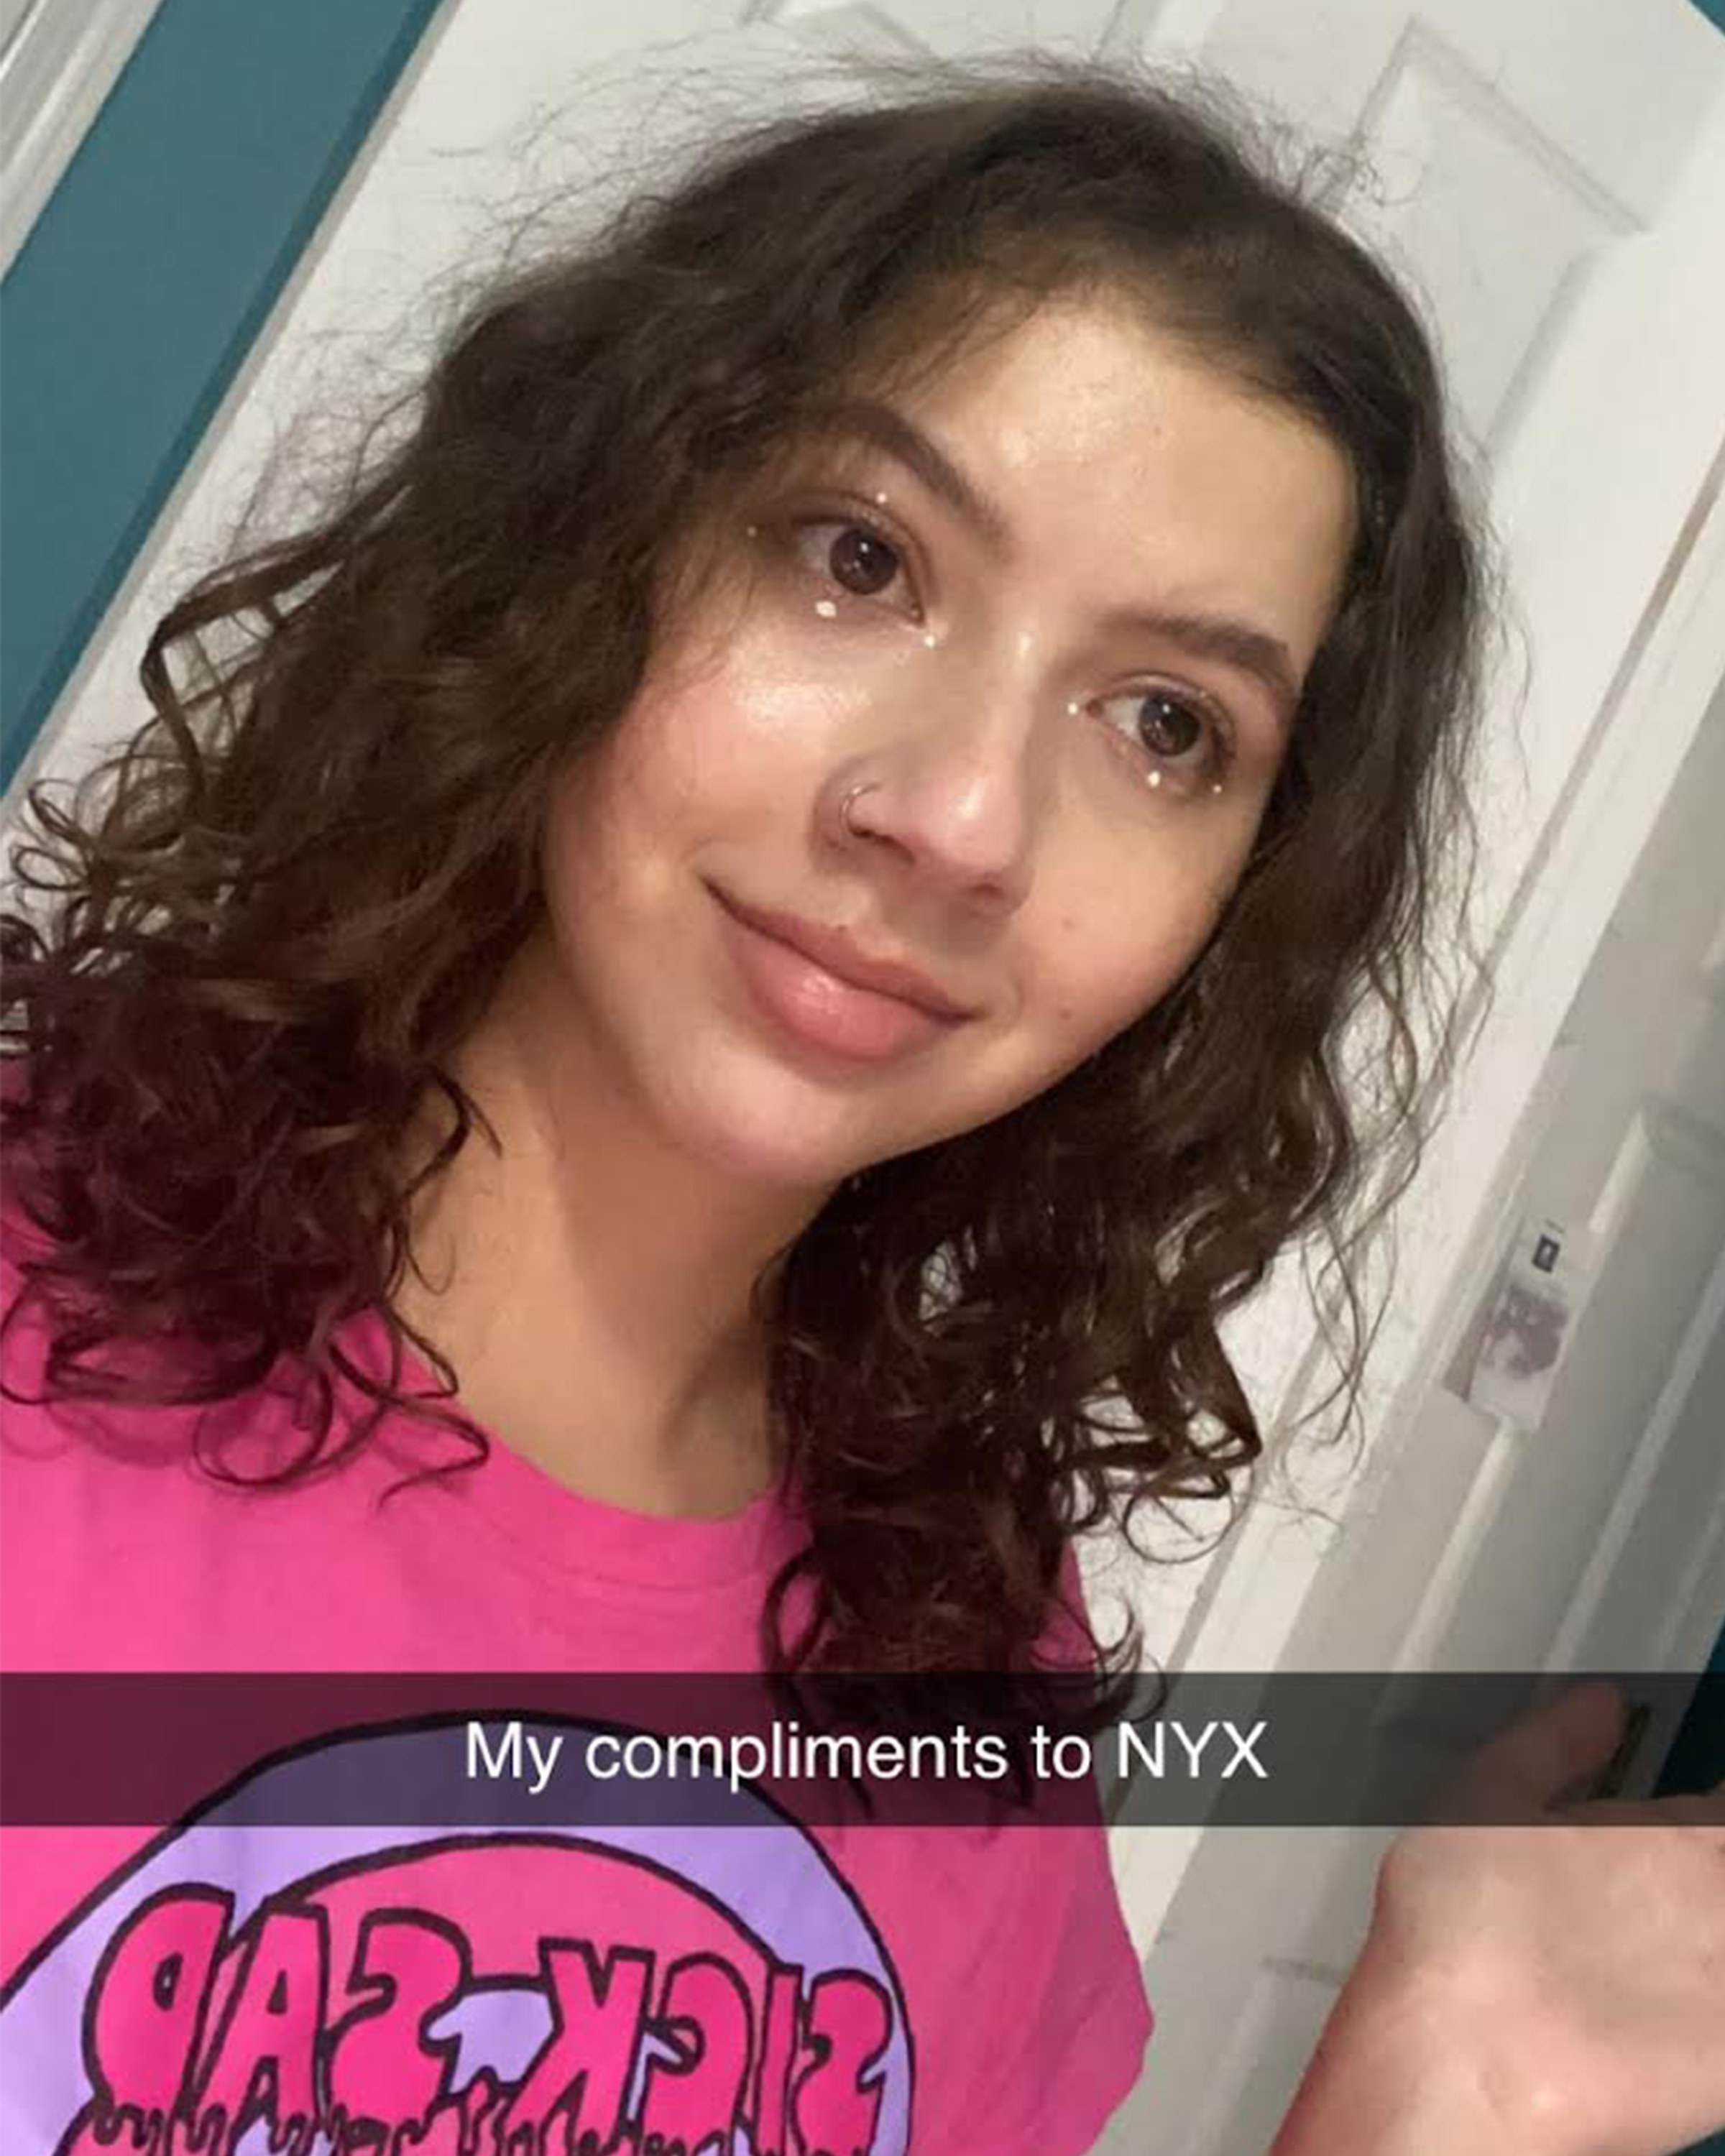 BuzzFeed Staffer Maya Ogolini smiles in a Snapchat selfie with a caption that reads &quot;My compliments to NYX&quot;